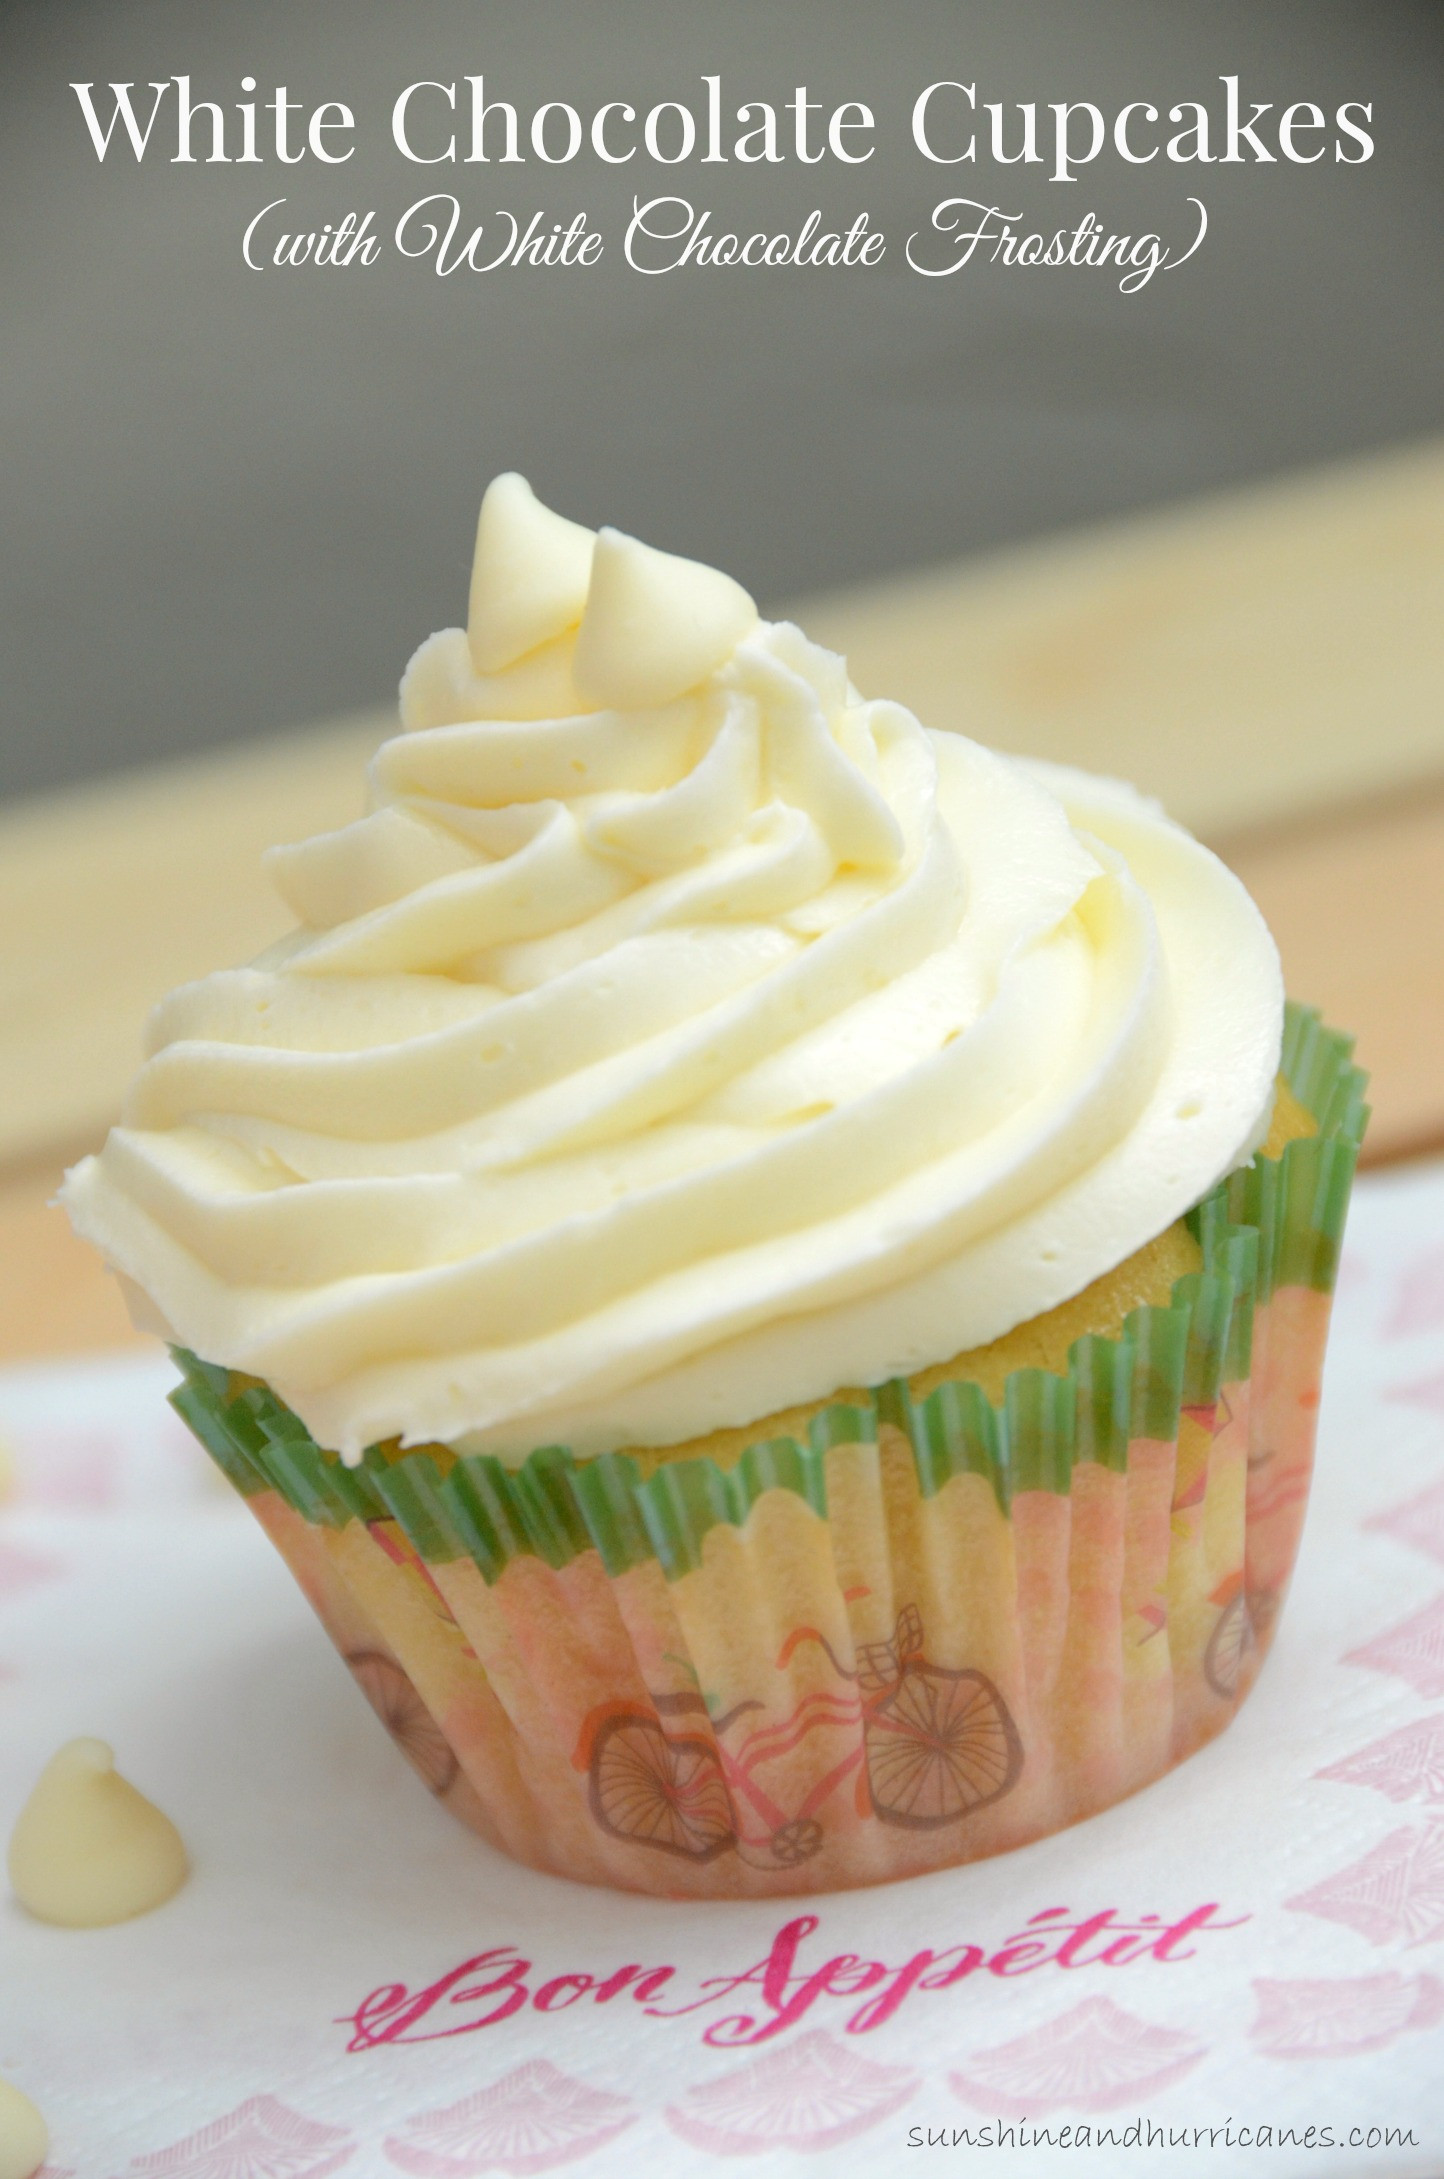 White Chocolate Cupcakes
 White Chocolate Cupcakes with White Chocolate Frosting